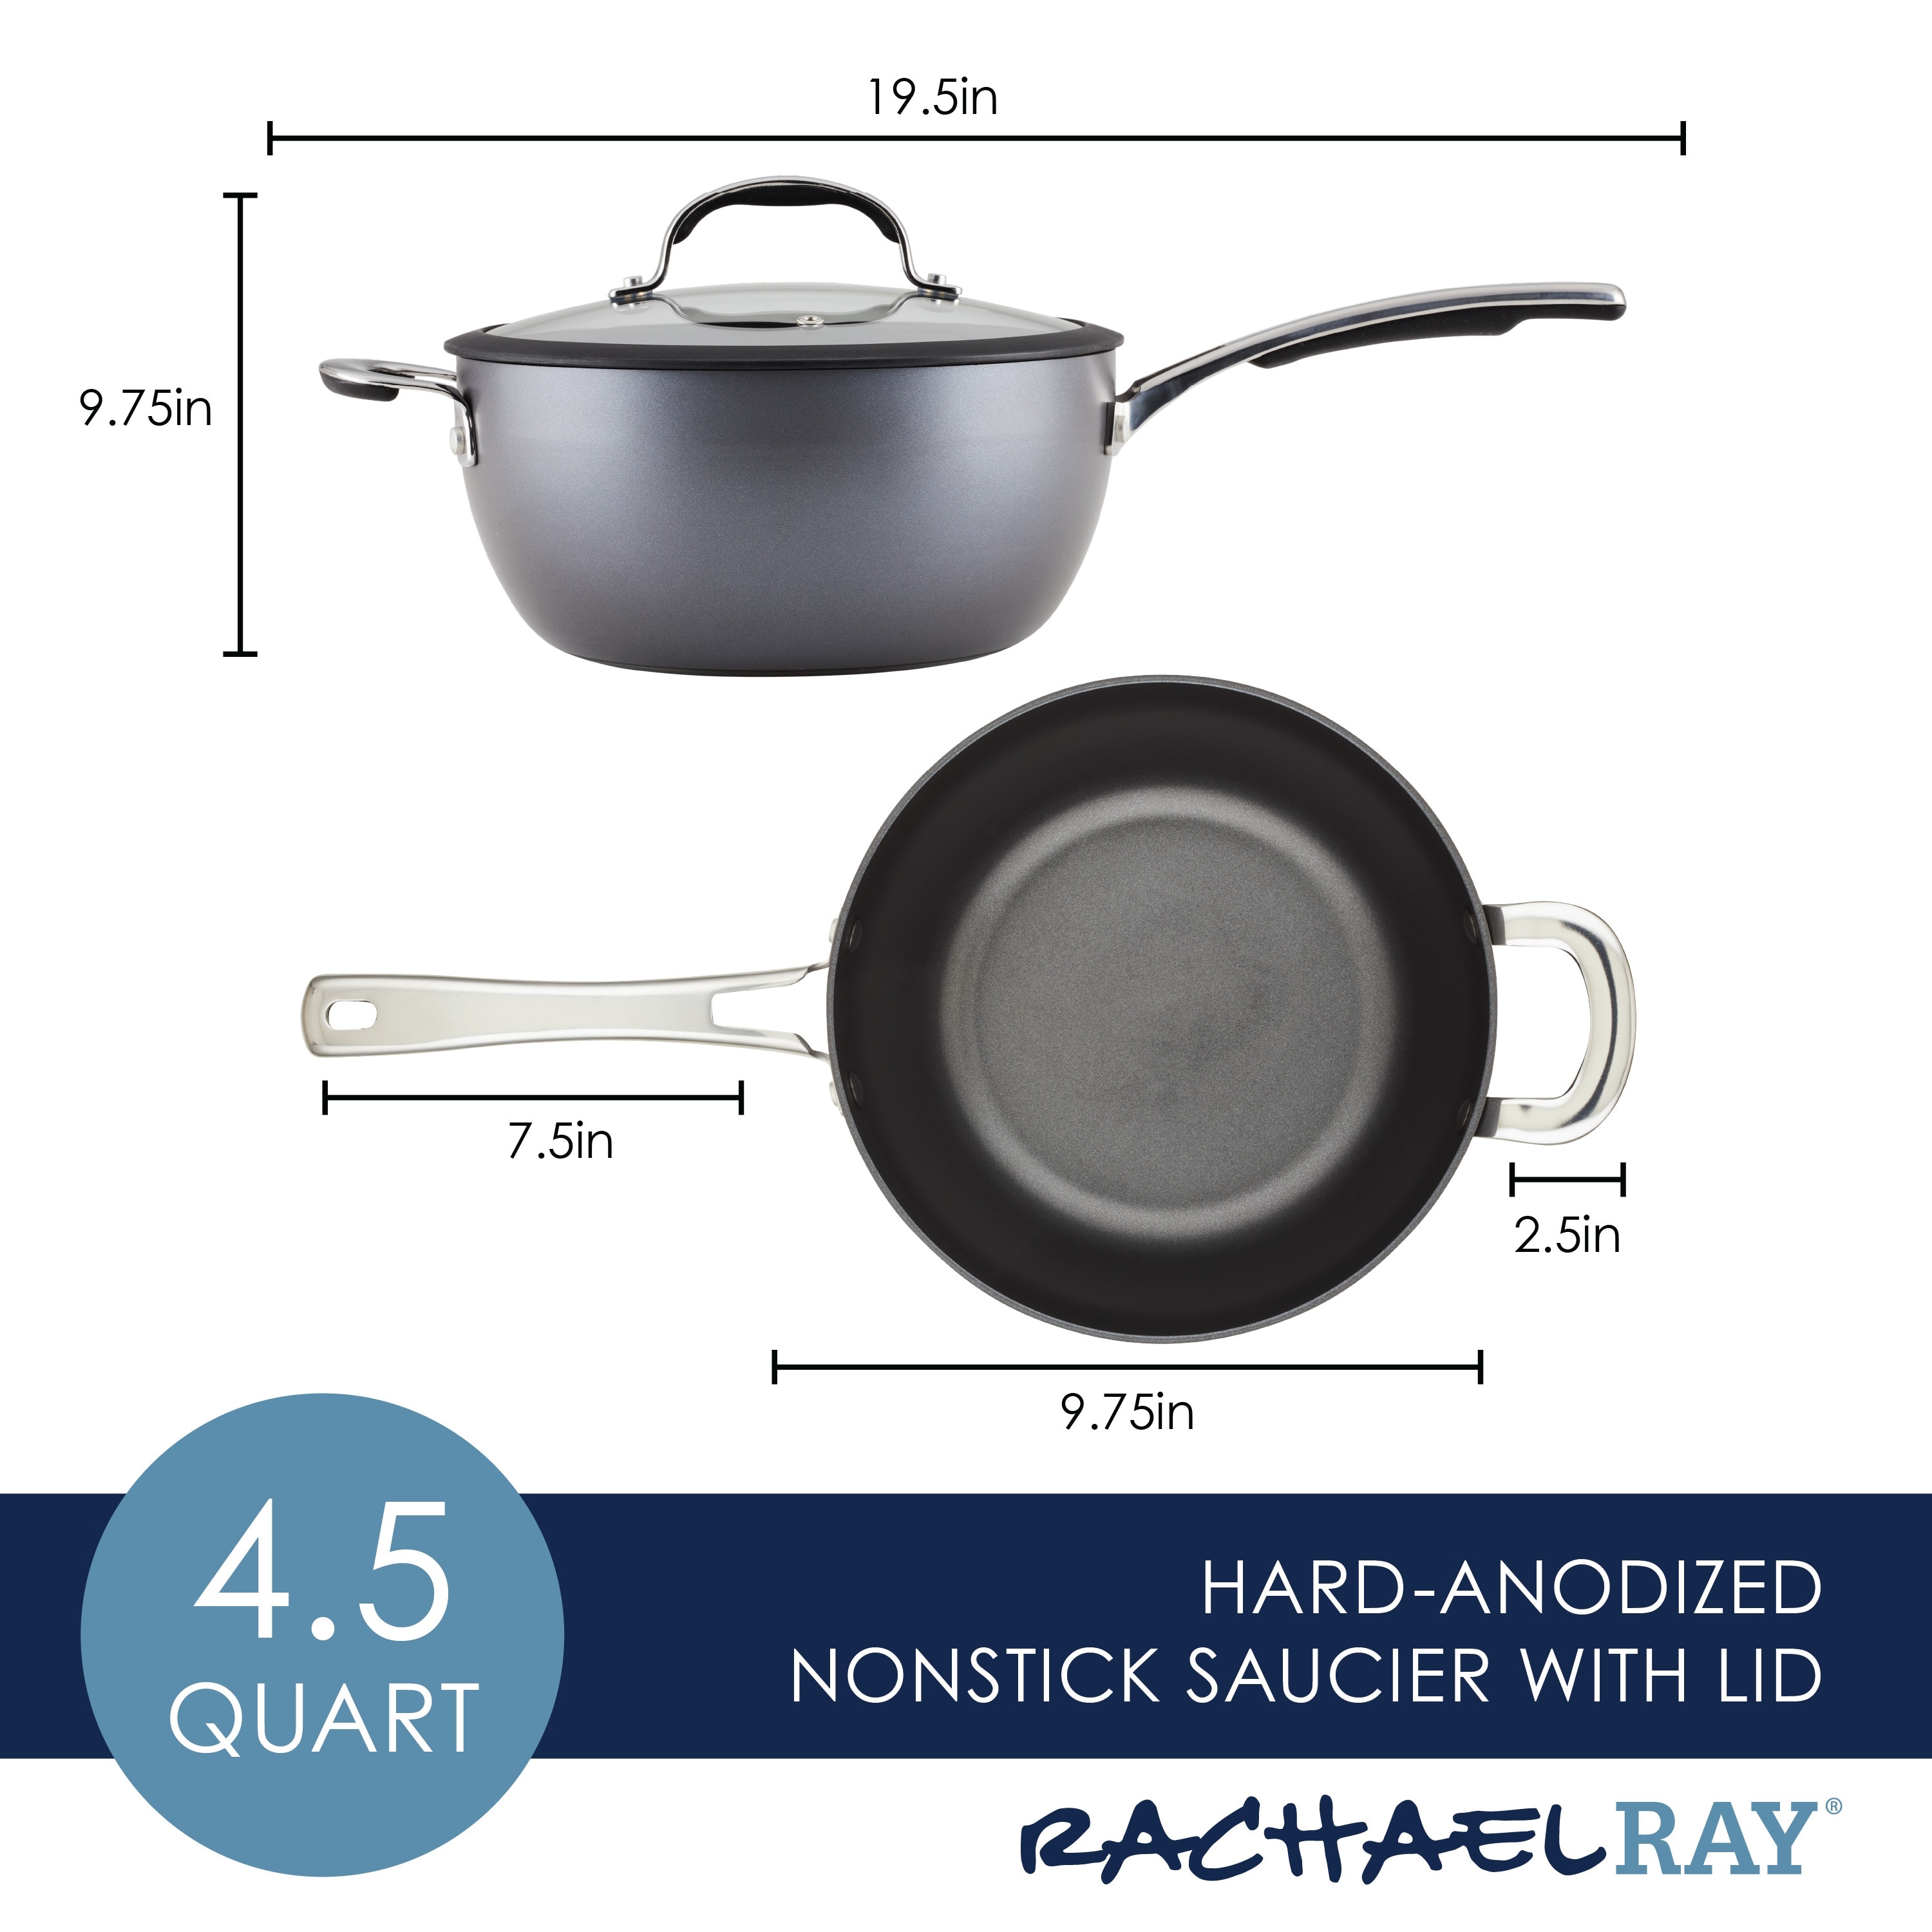 https://ak1.ostkcdn.com/images/products/is/images/direct/0ee2a19376cc78957e7d64cf5f574af5a41362fc/Rachael-Ray-Cook-%2B-Create-Hard-Anodized-Nonstick-Saucier-Sauce-Pan-with-Lid-and-Helper-Handle%2C-4.5-Quart%2C-Black.jpg